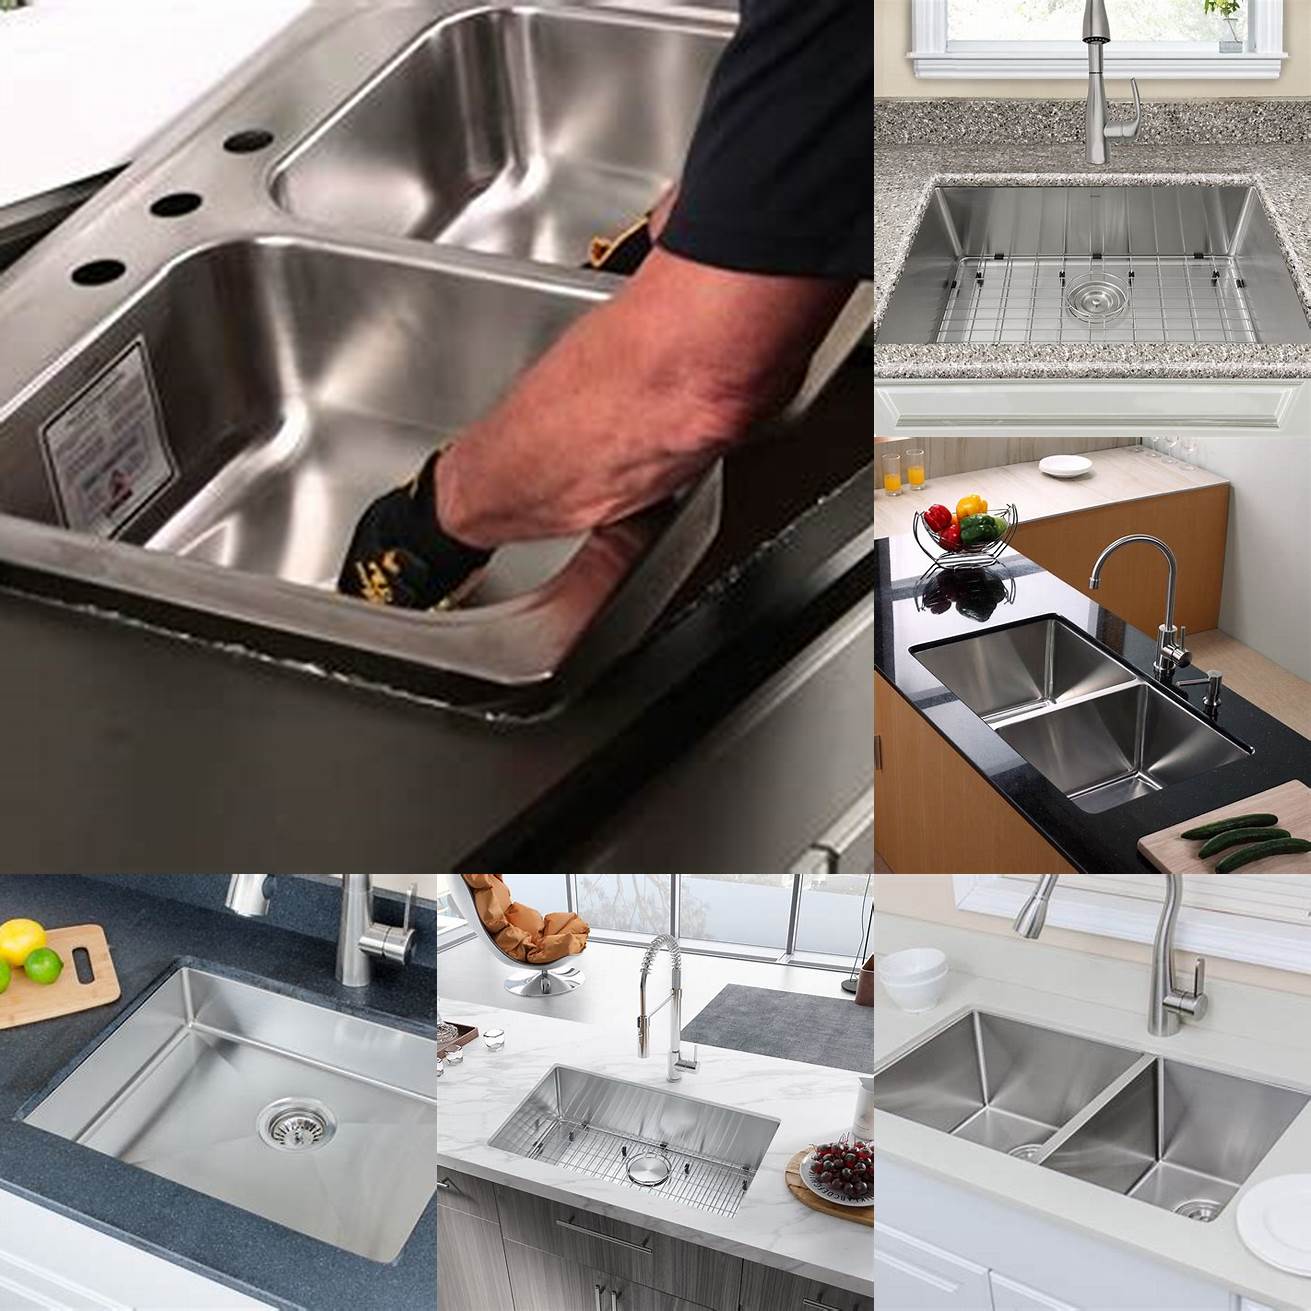 A picture of a stainless steel kitchen sink with an undermount installation